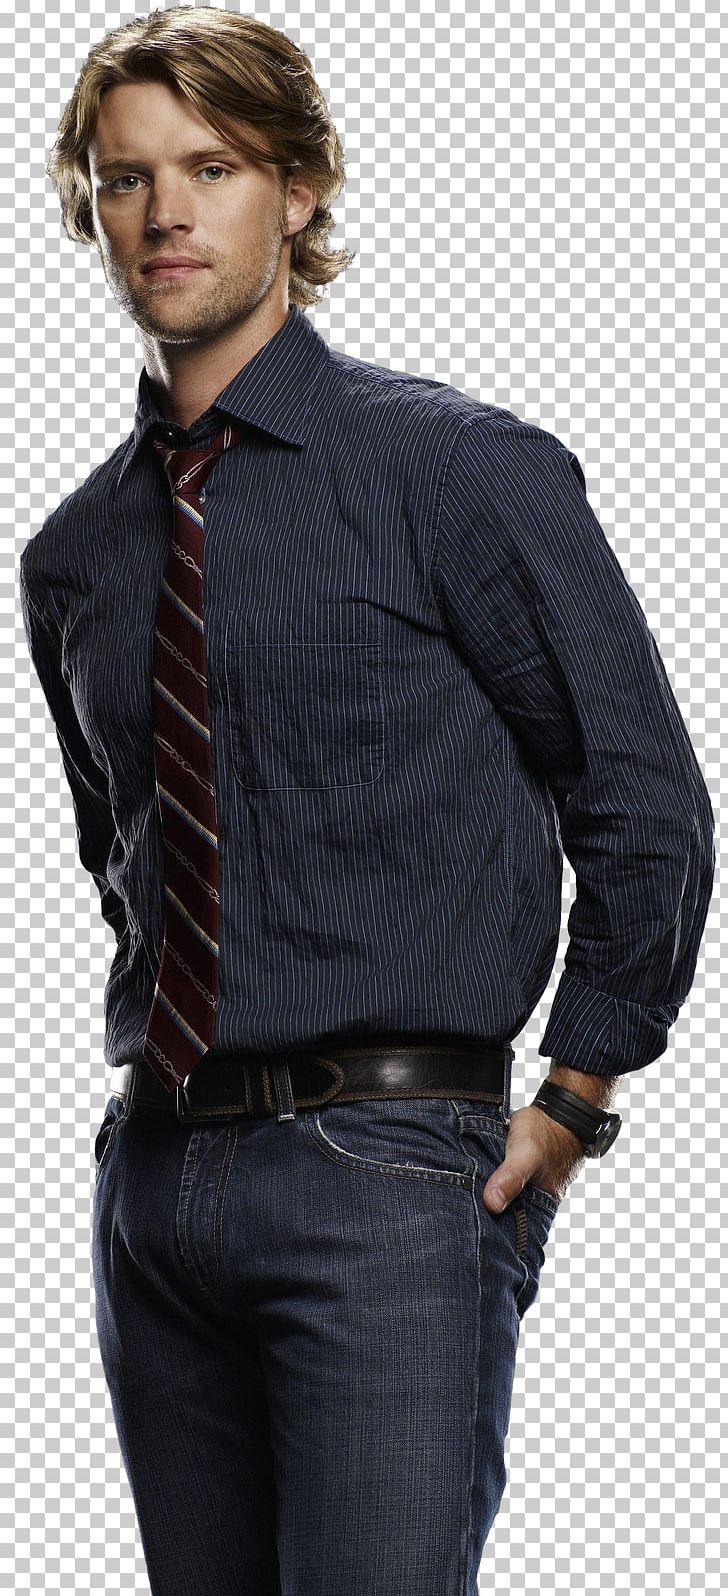 Jesse Spencer House Robert Chase Actor PNG, Clipart, Actor, Blazer, Blog, Celebrity, Chase Free PNG Download